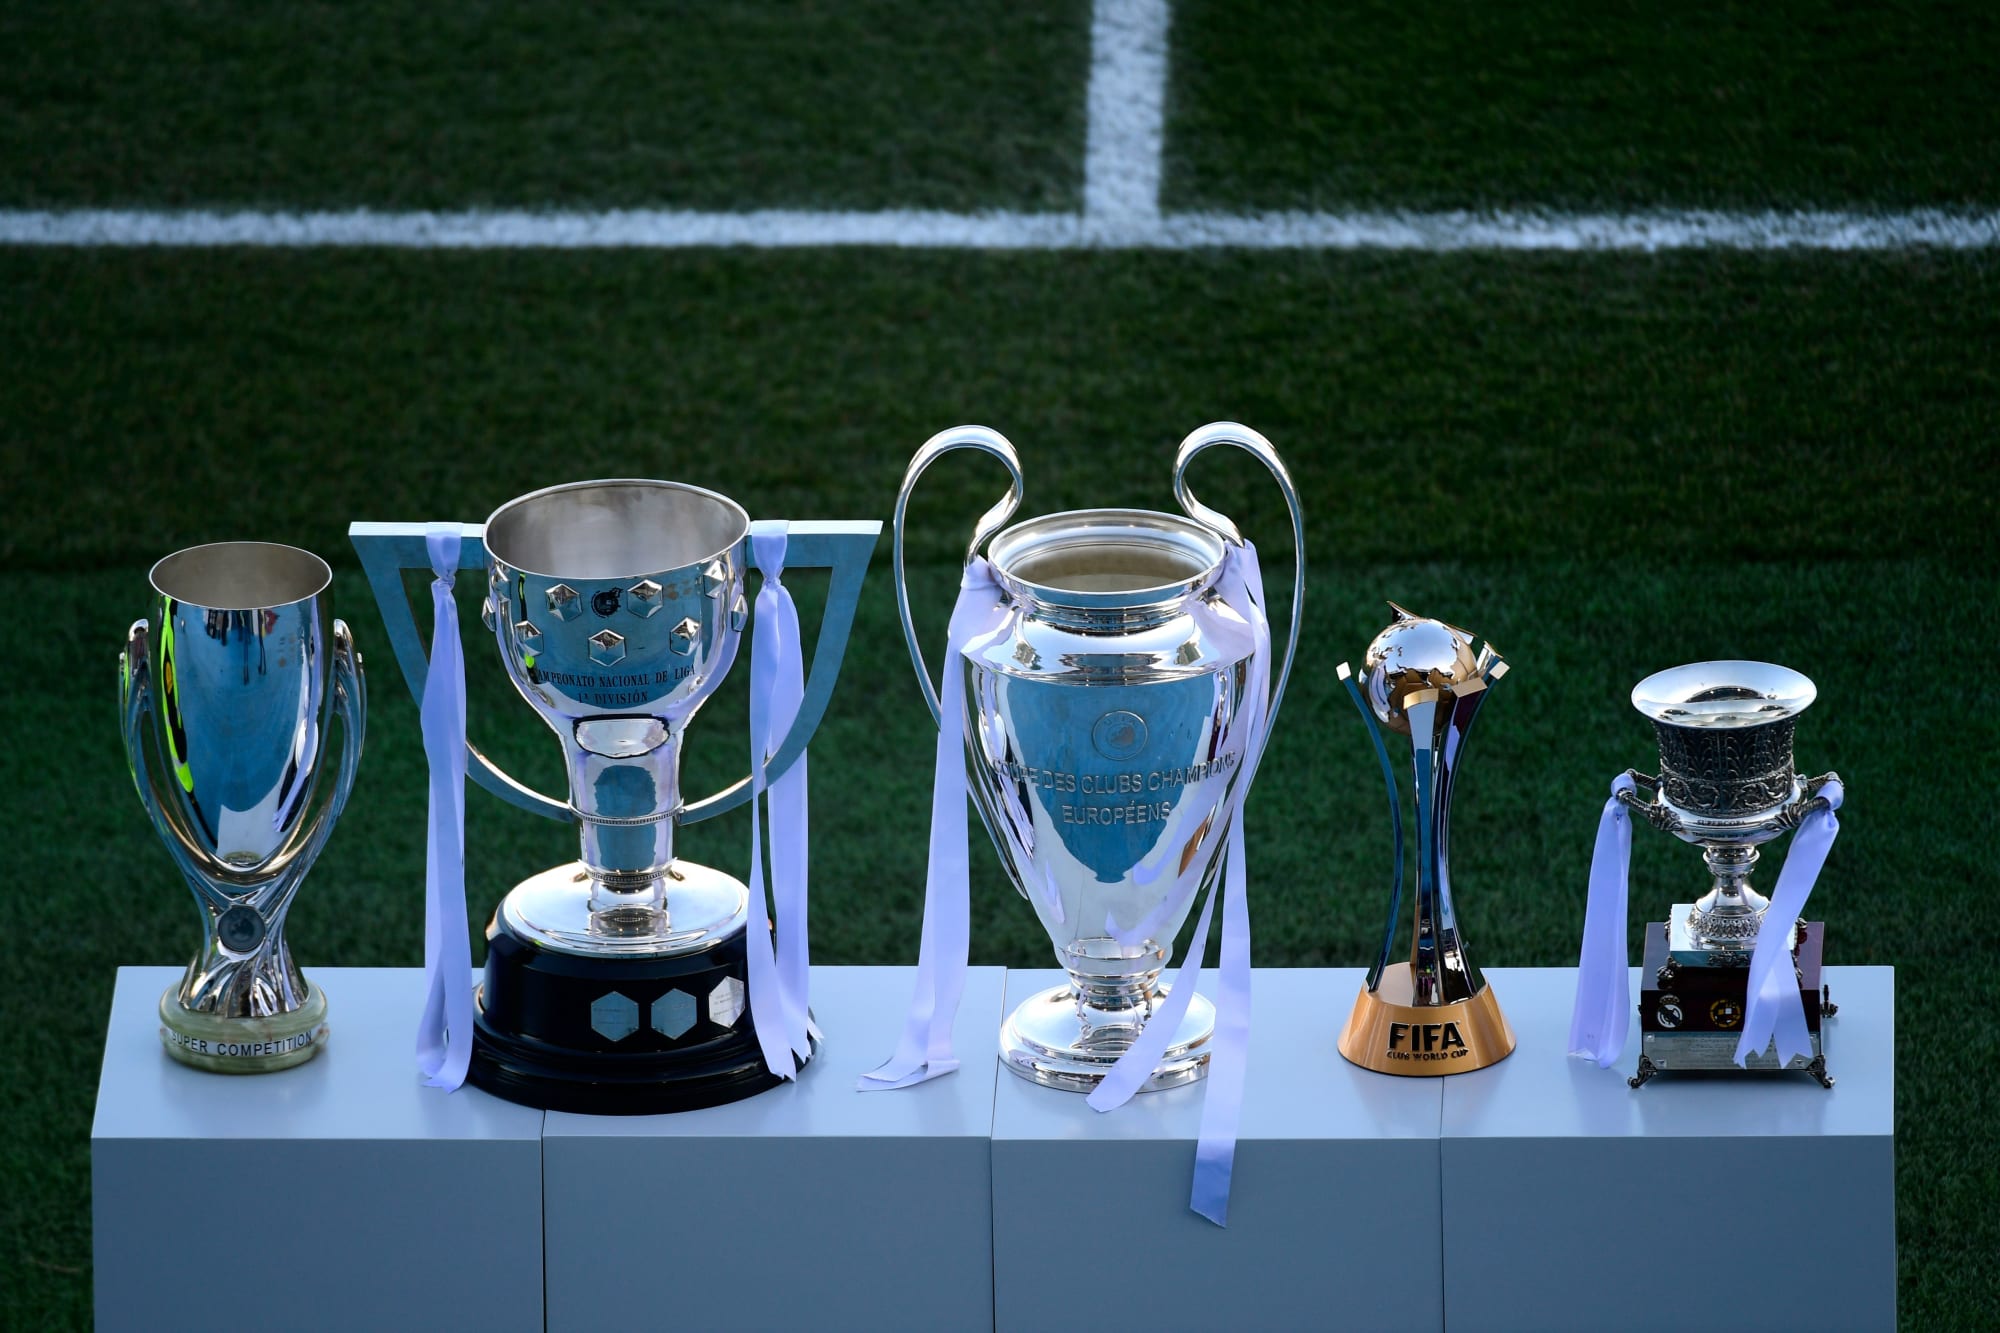 The Copa del Rey now looks like Real Madrid's best chance for silverware